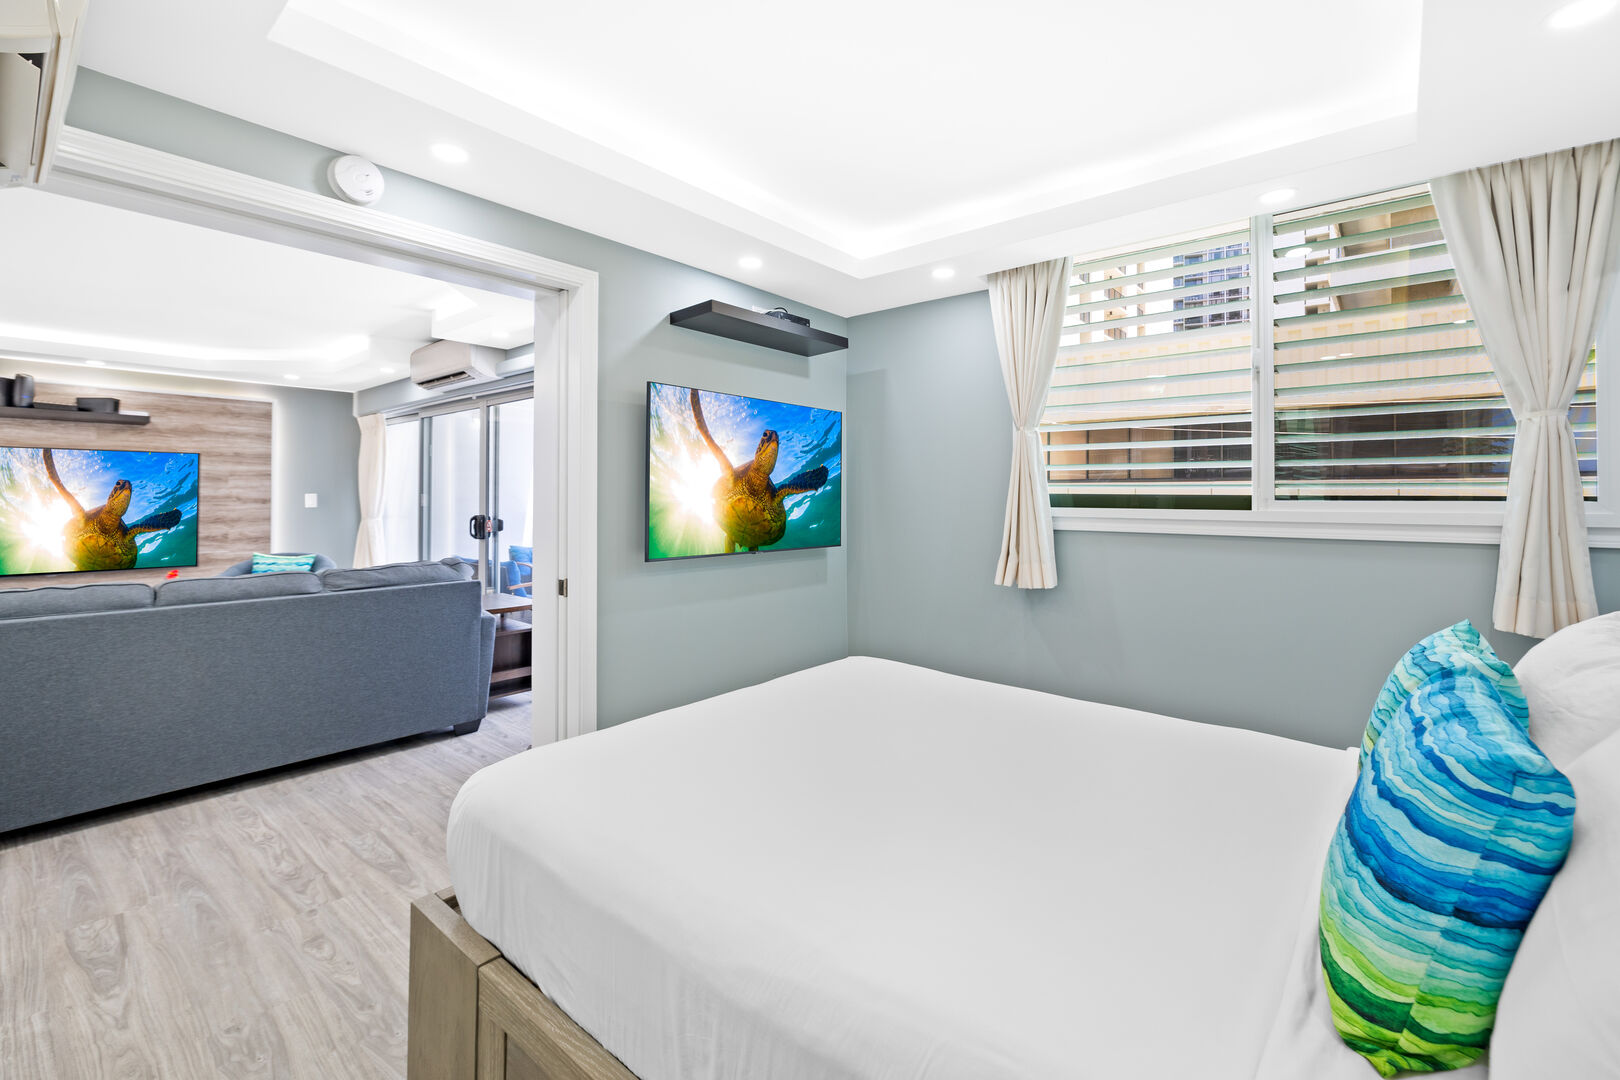 Enjoy watching your favorite shows while resting on a queen-size bed in the guest bedroom!